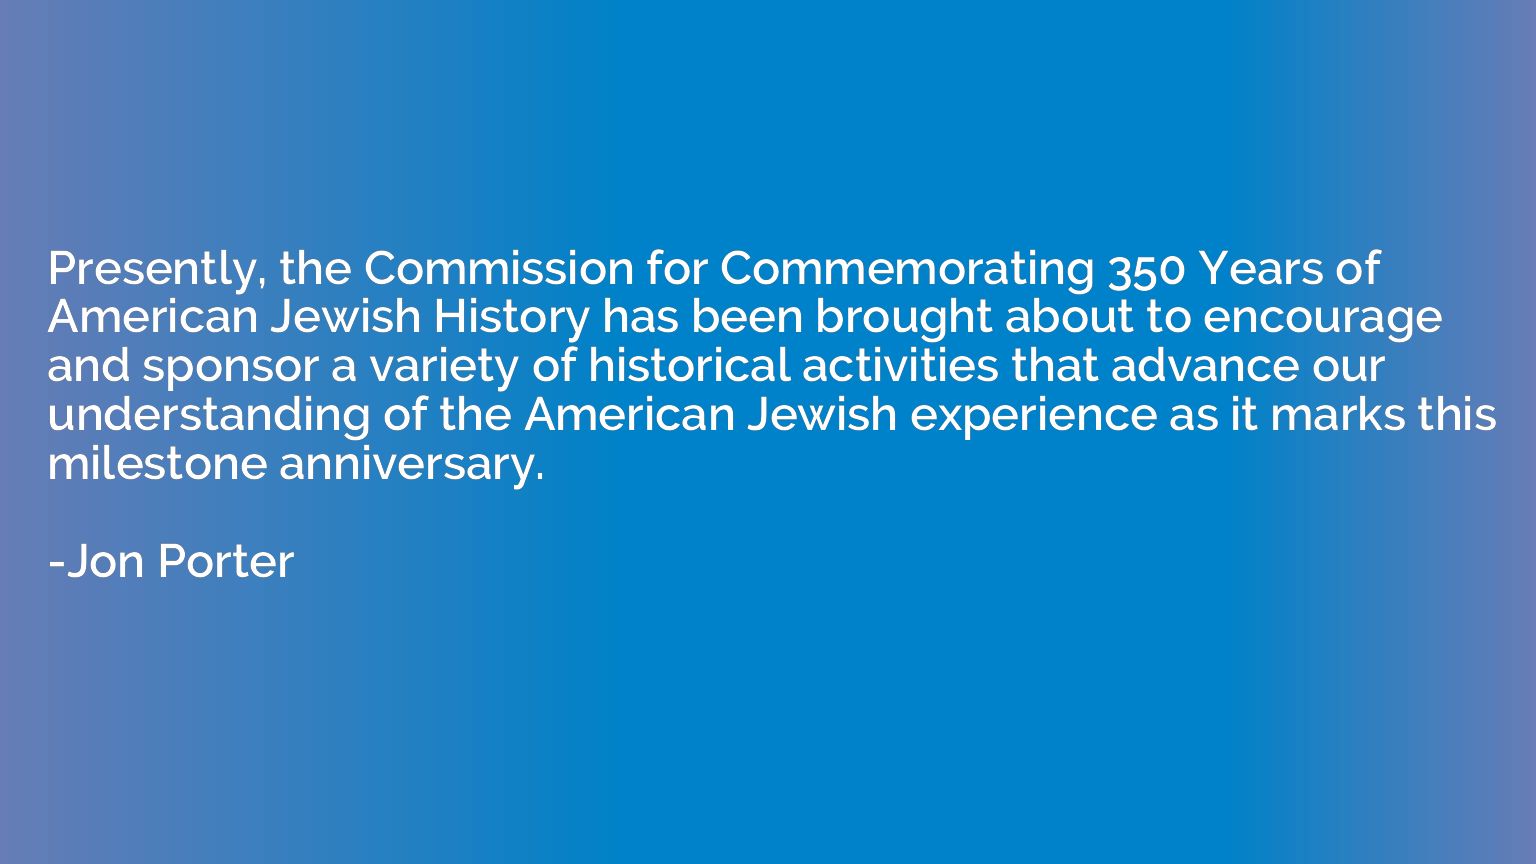 Presently, the Commission for Commemorating 350 Years of Ame